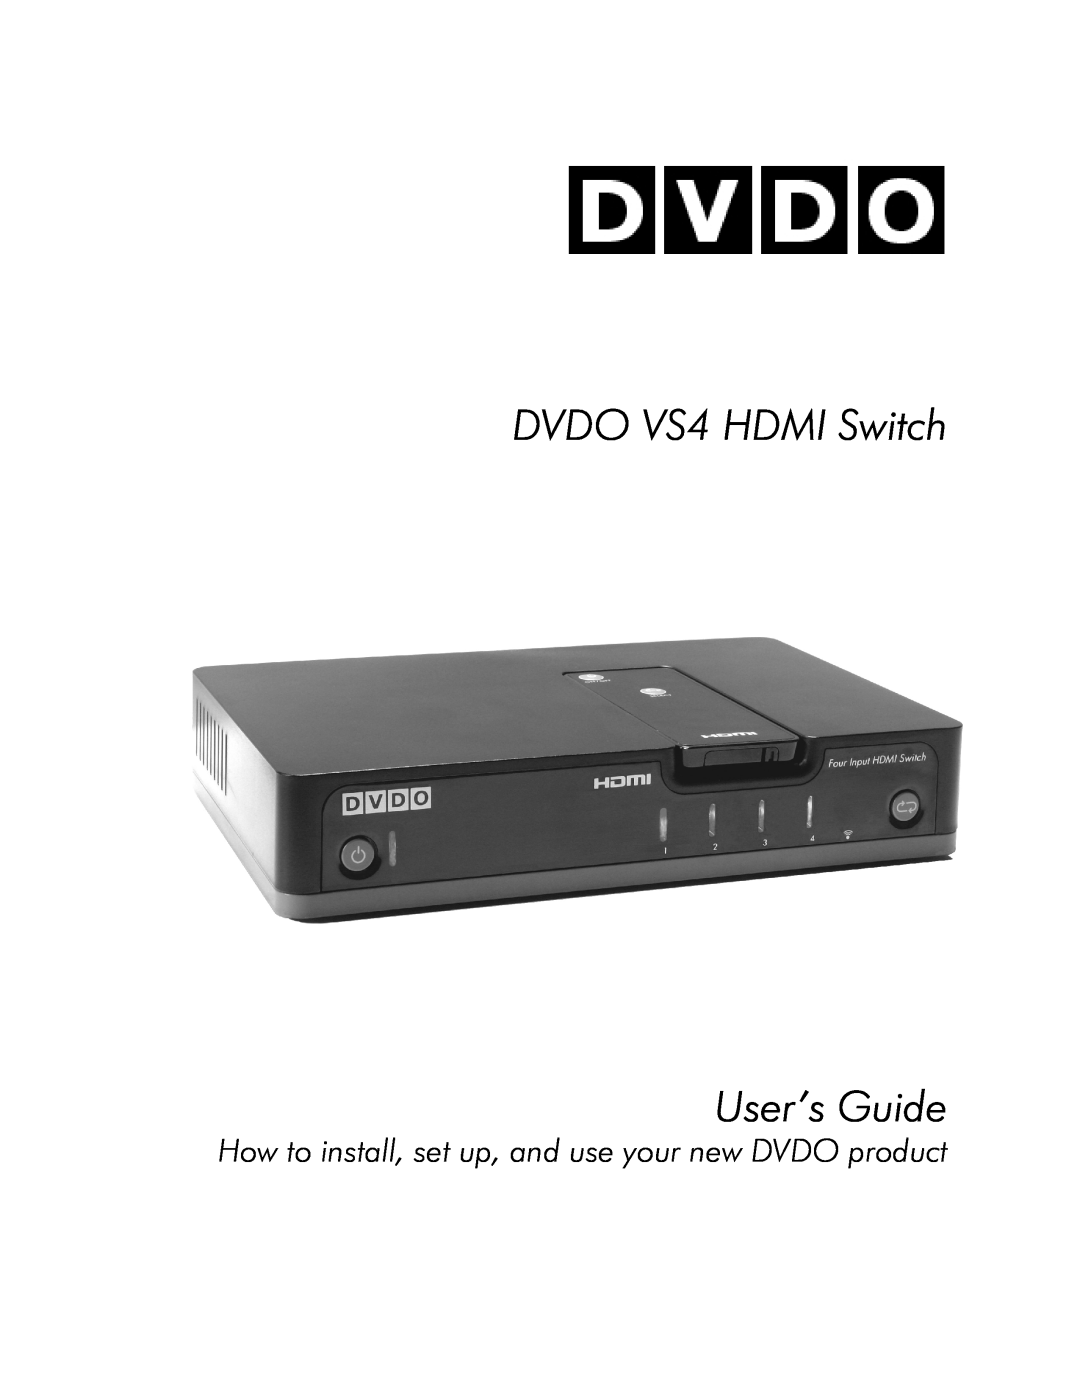 DVDO manual DVDO VS4 HDMI Switch User’s Guide, How to install, set up, and use your new DVDO product 